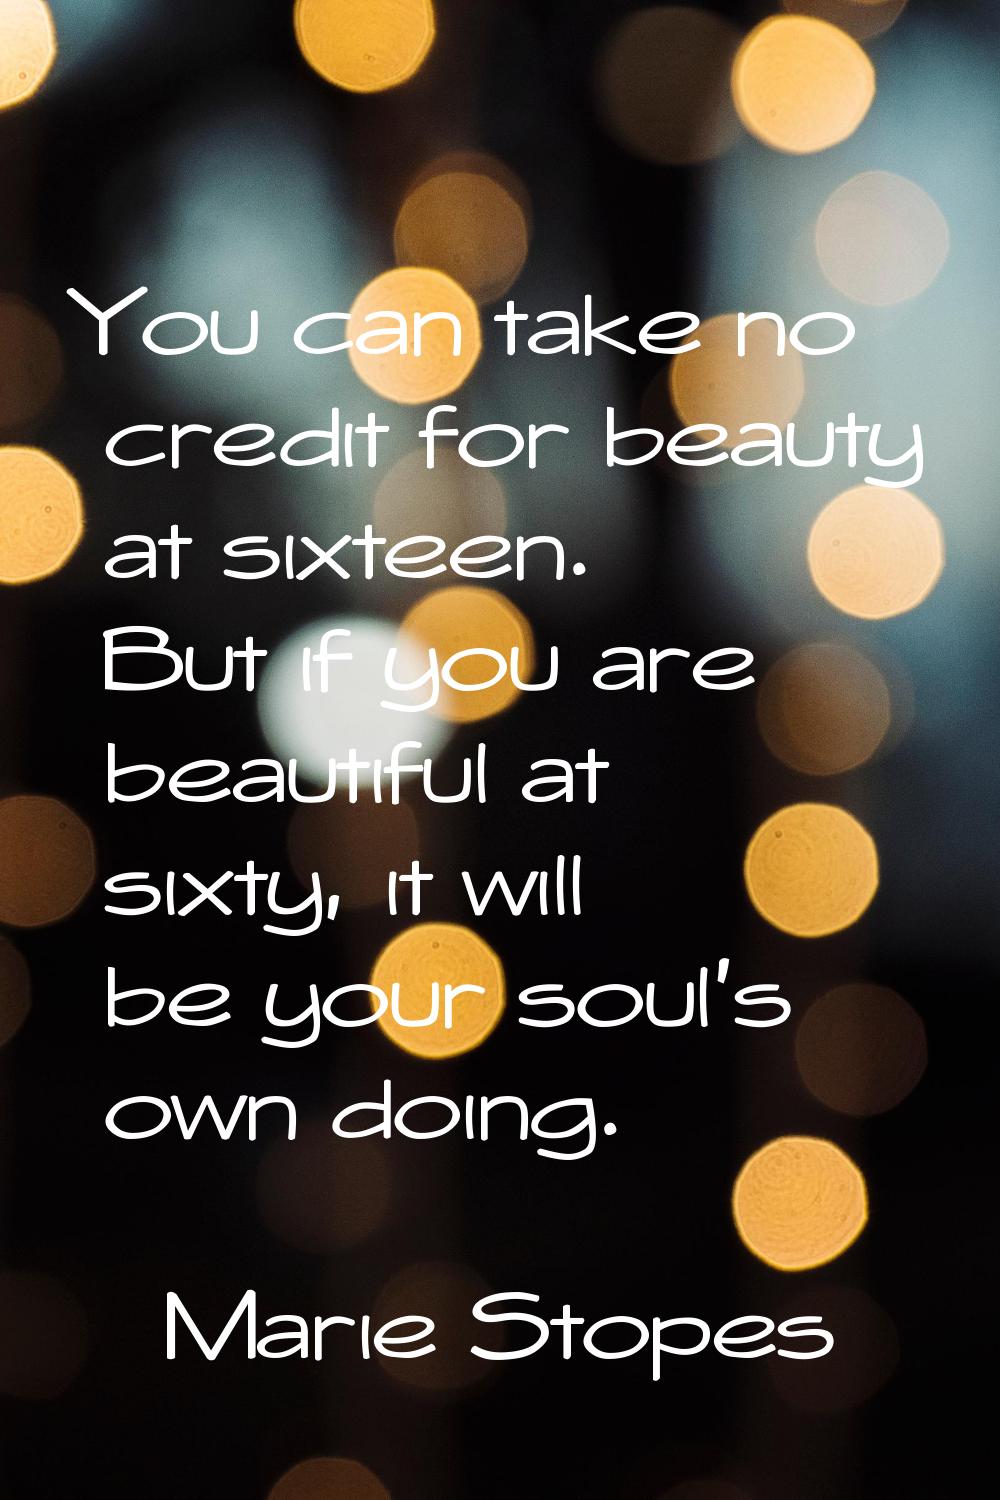 You can take no credit for beauty at sixteen. But if you are beautiful at sixty, it will be your so